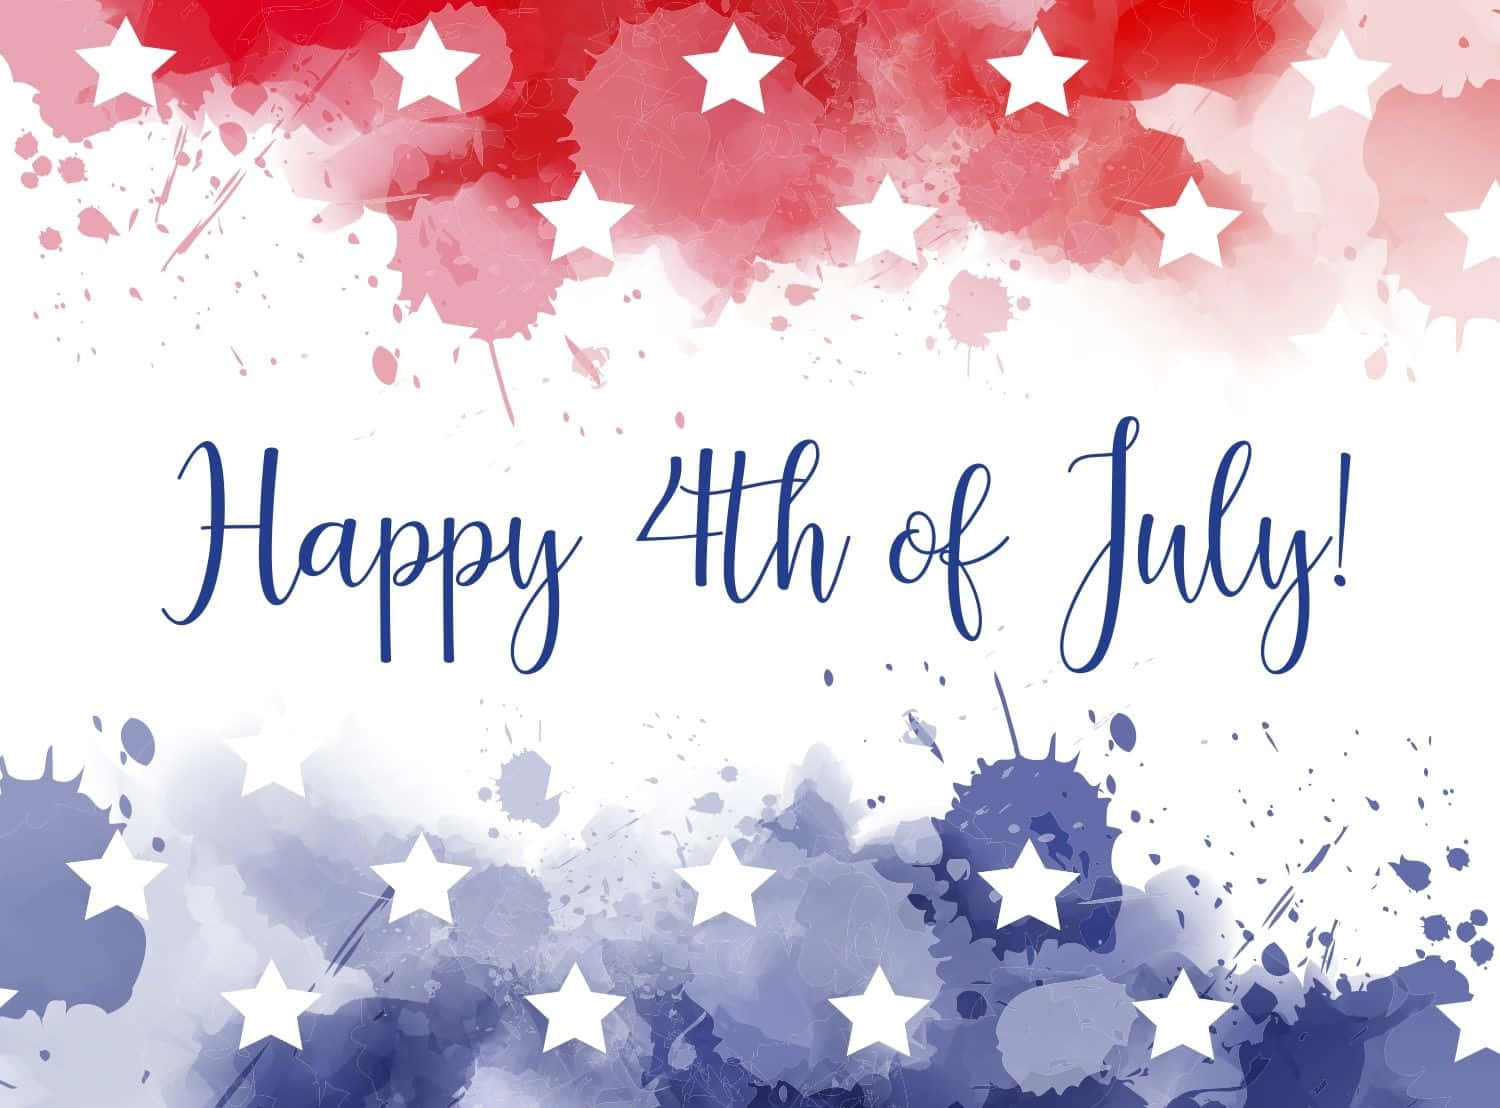 Celebrate the 4th of July with friends and family!